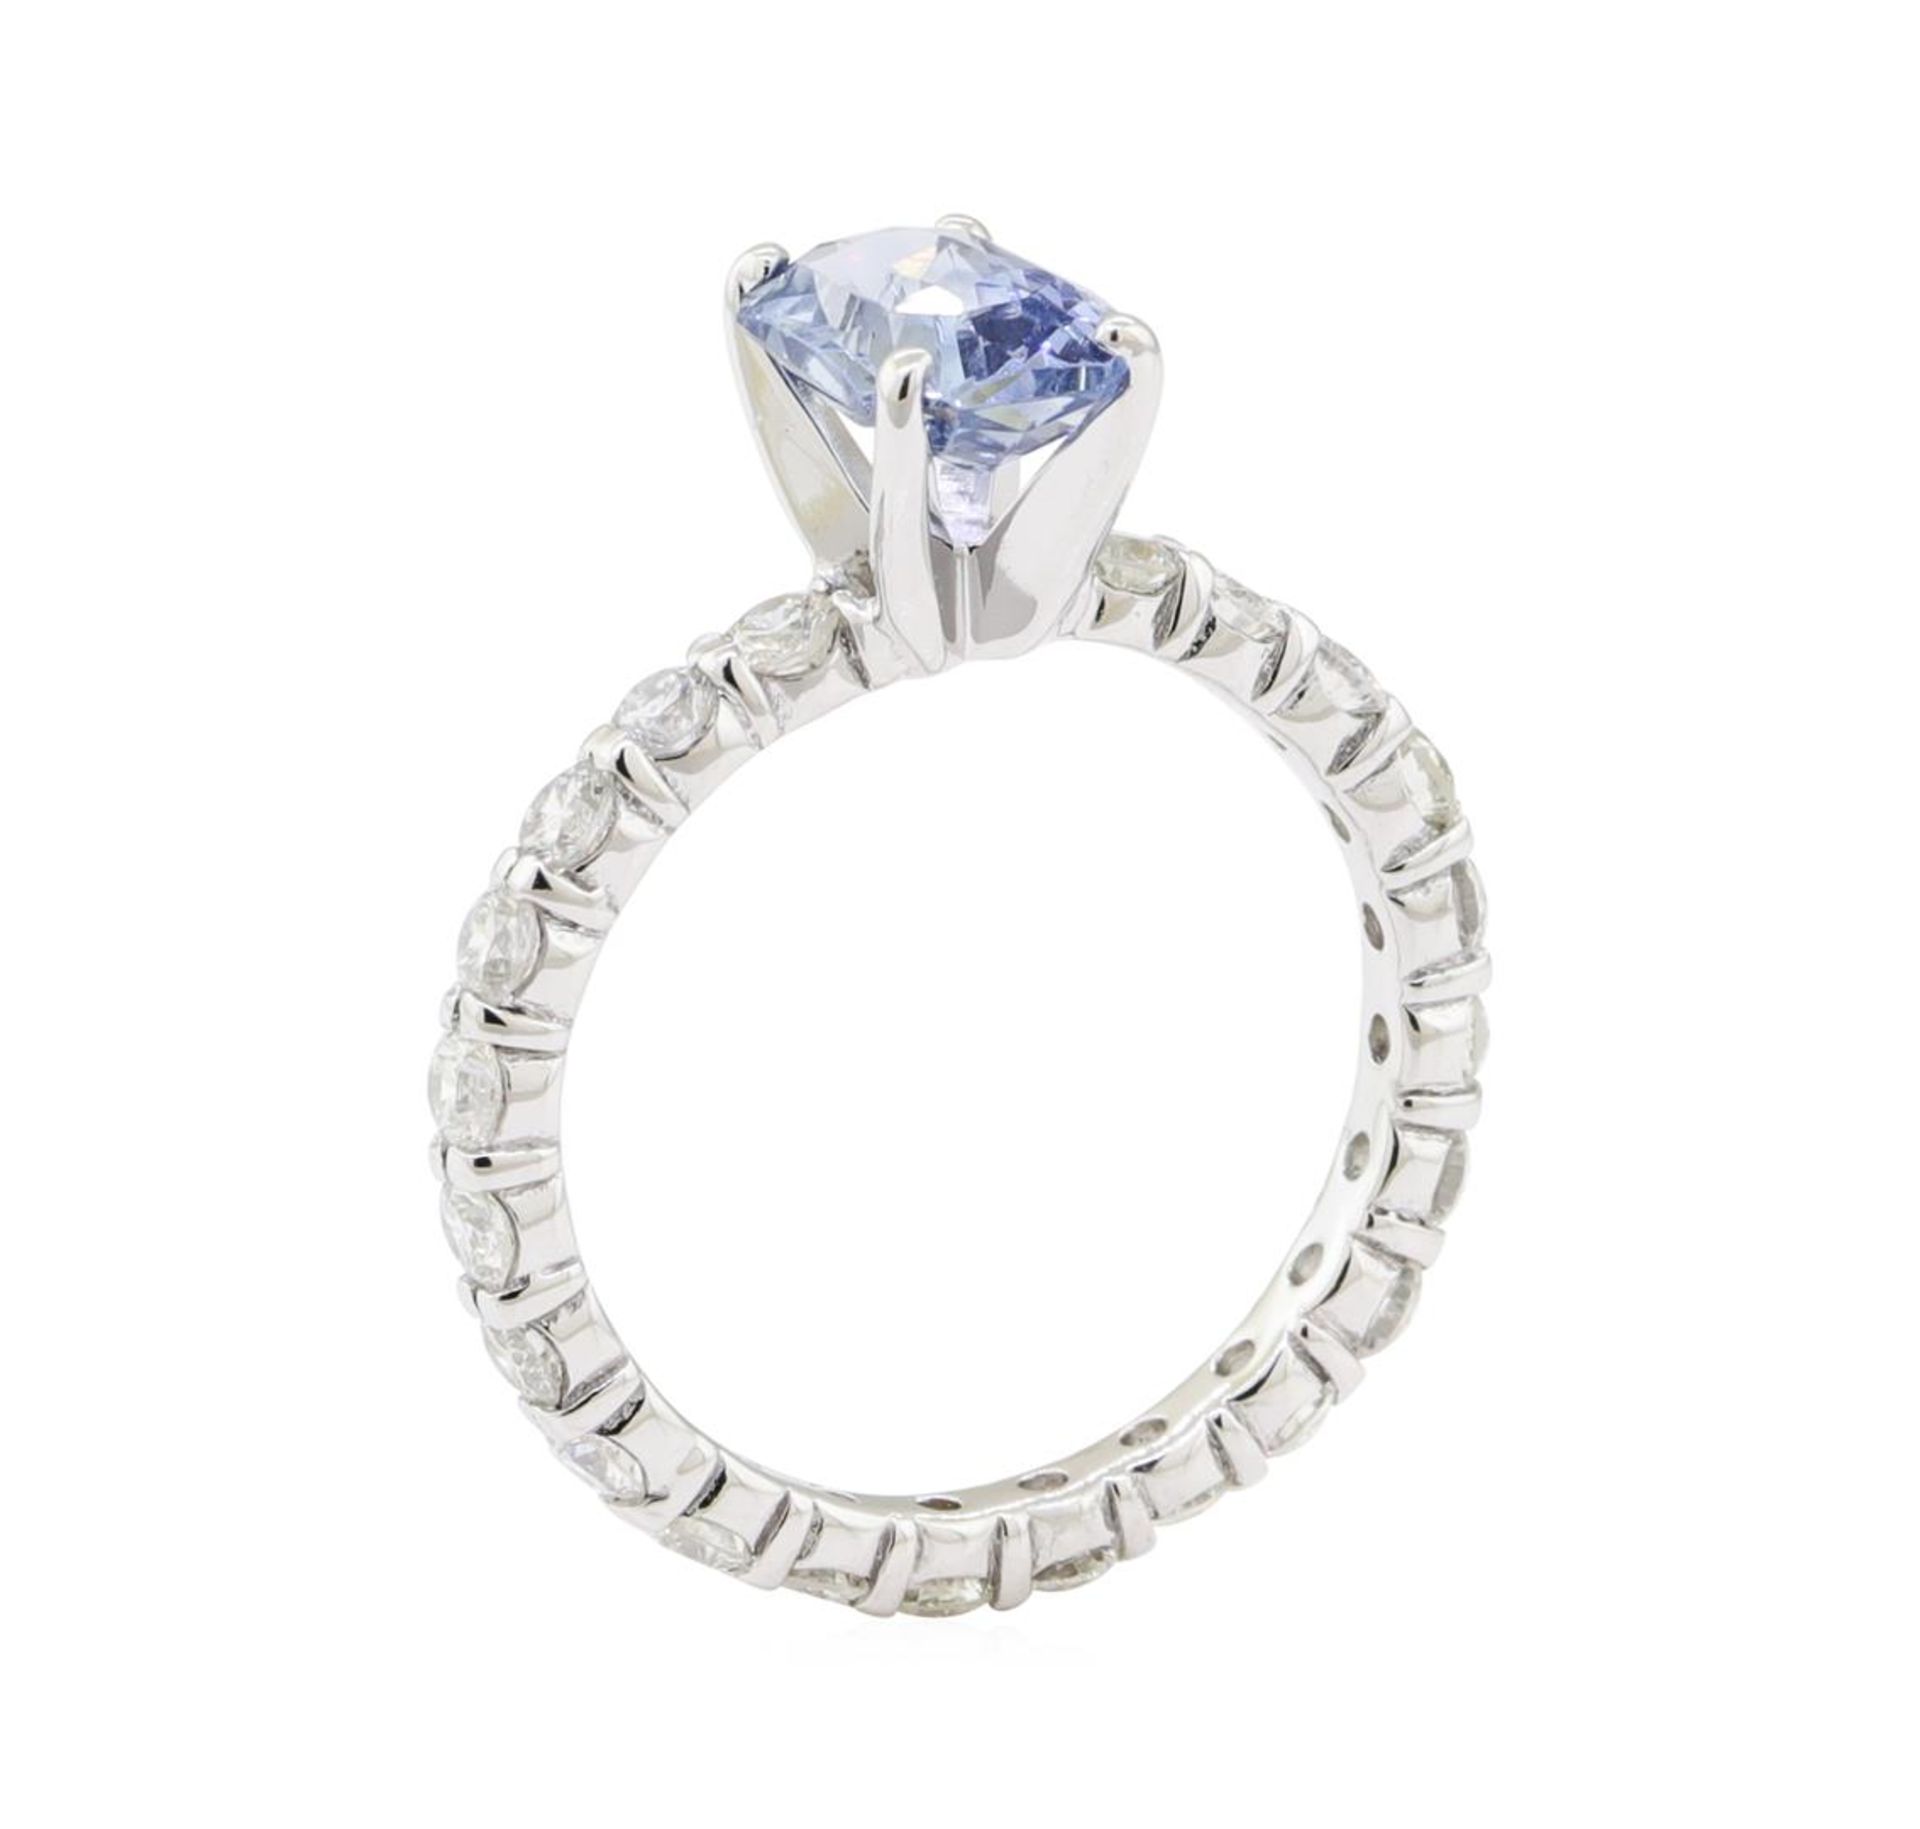 2.84 ctw Sapphire and Diamond Ring - 14KT White Gold - Image 4 of 5